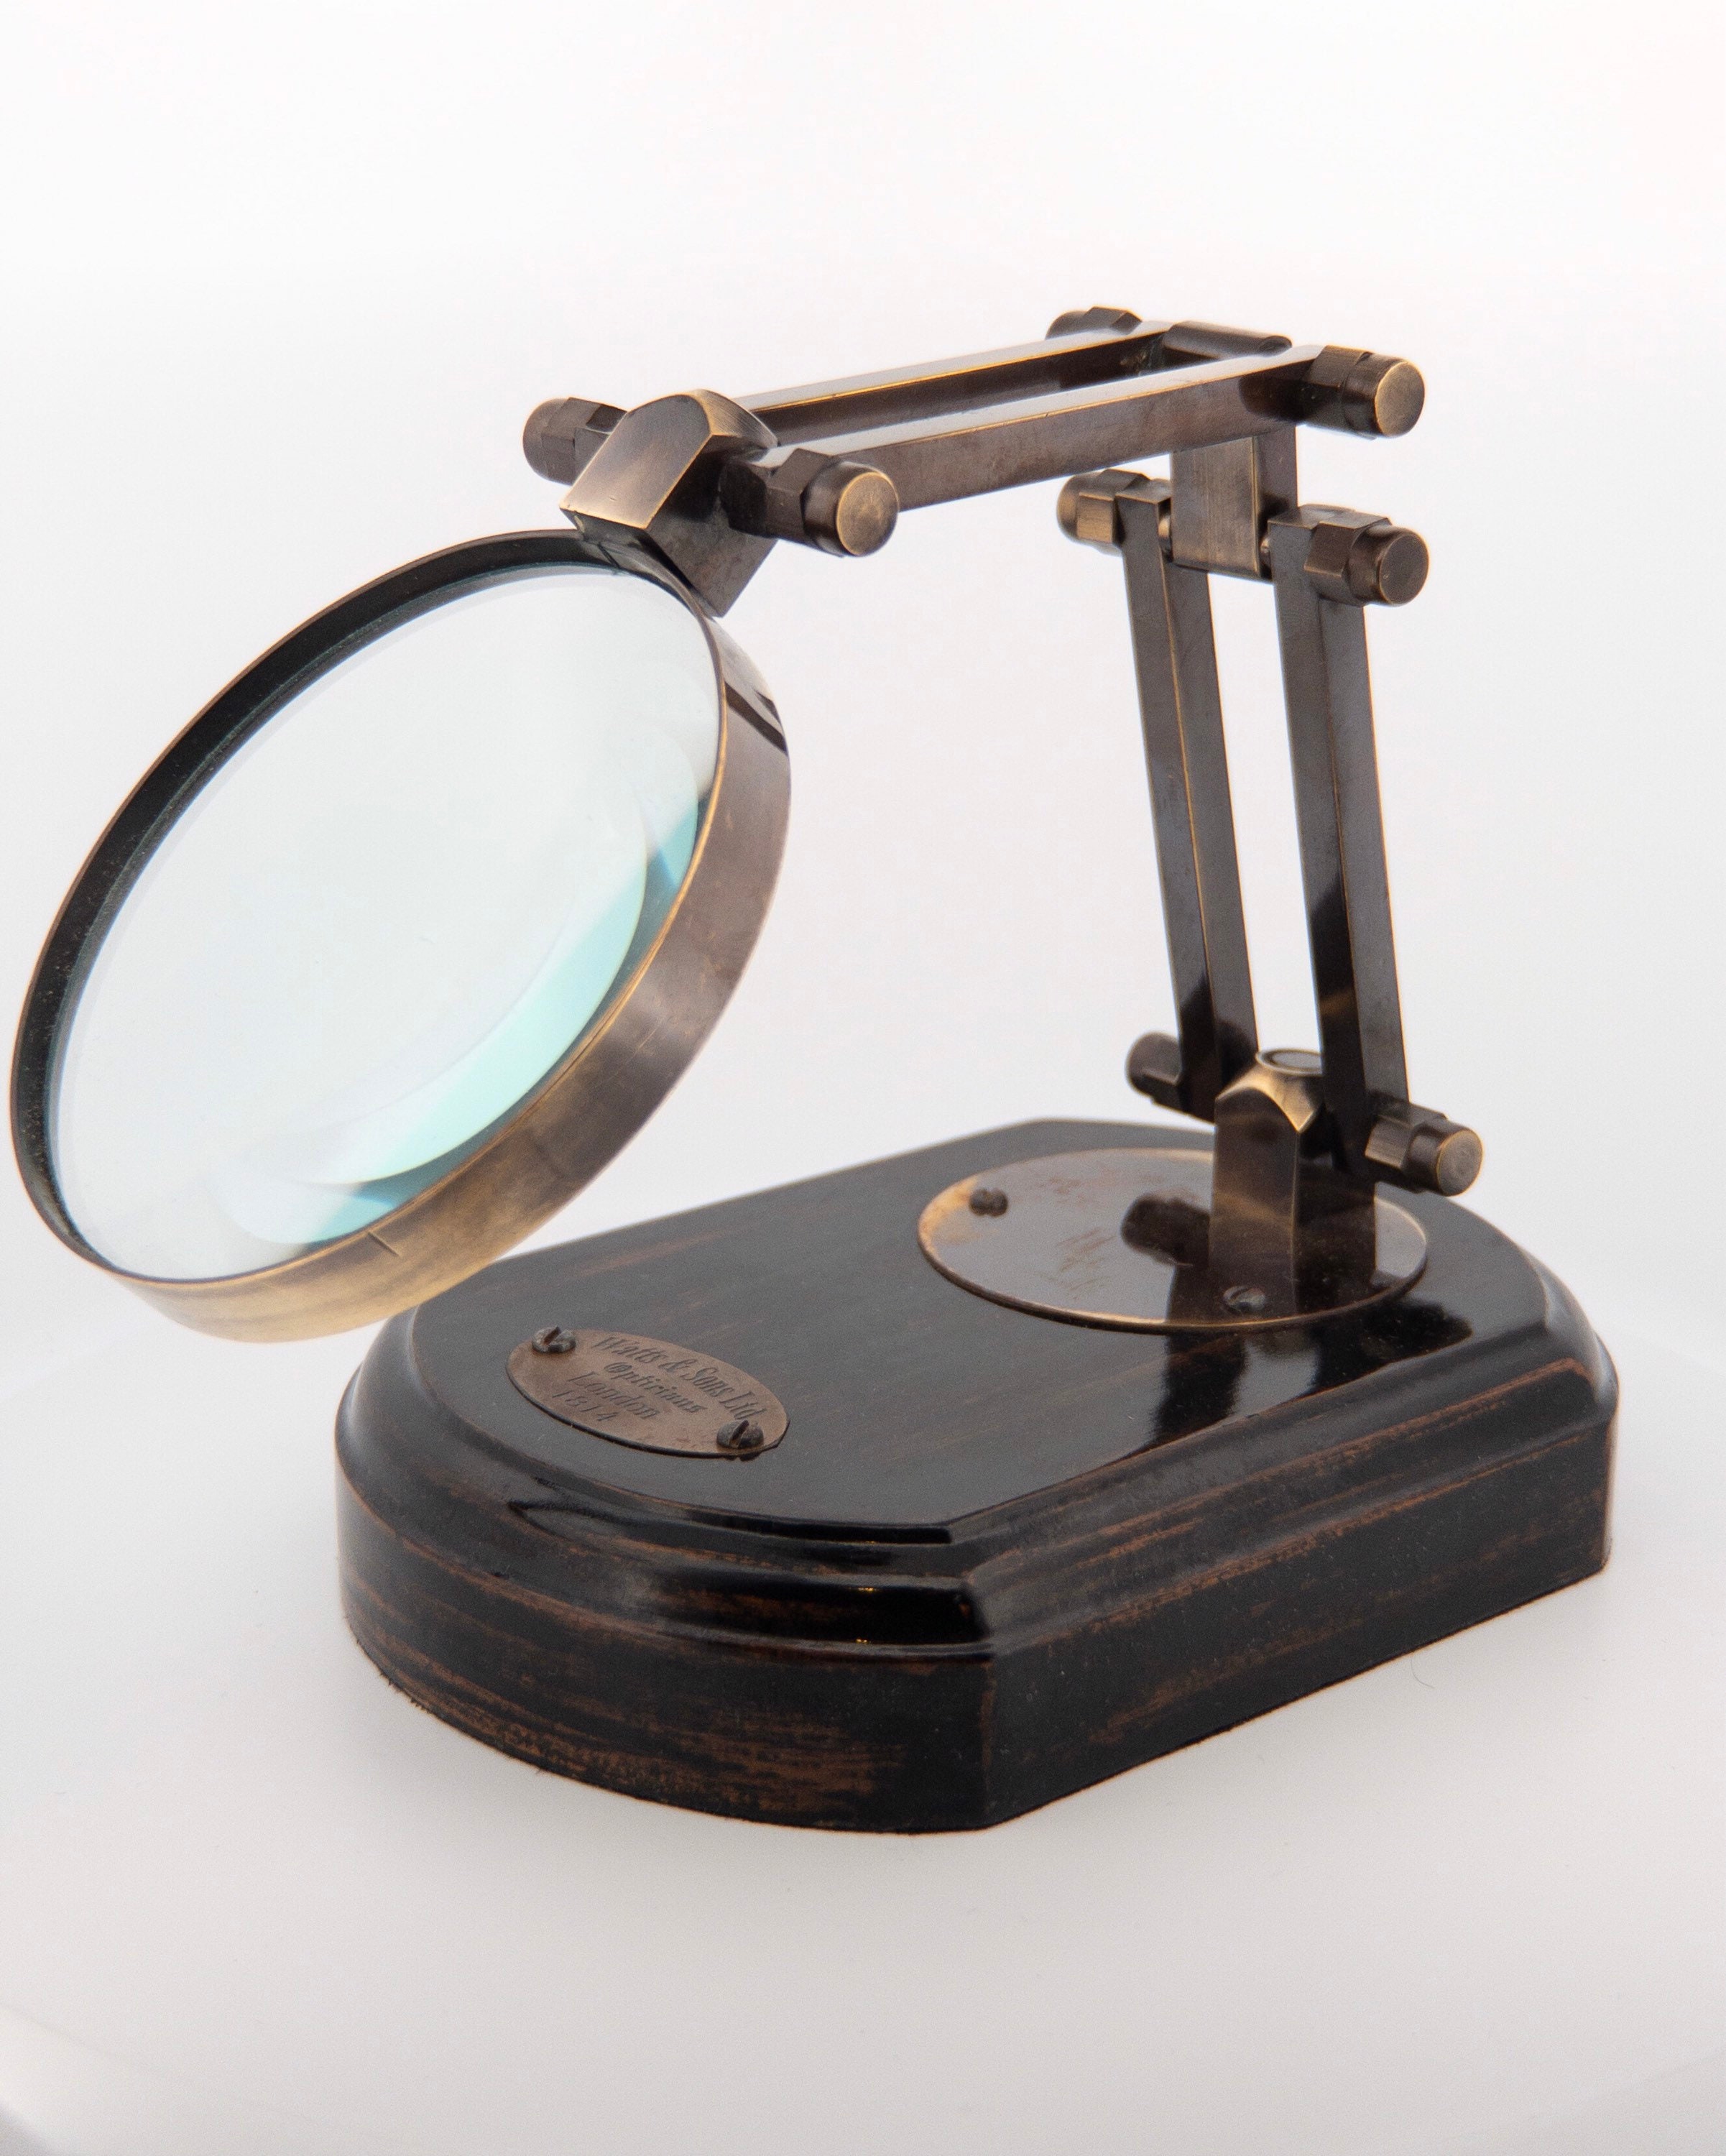 Hands Free Magnifier With Light Magnifier With Light for Crafting 2 in 1 LED  Necklace Magnifier Magnifying Glass for Cross Stitch 